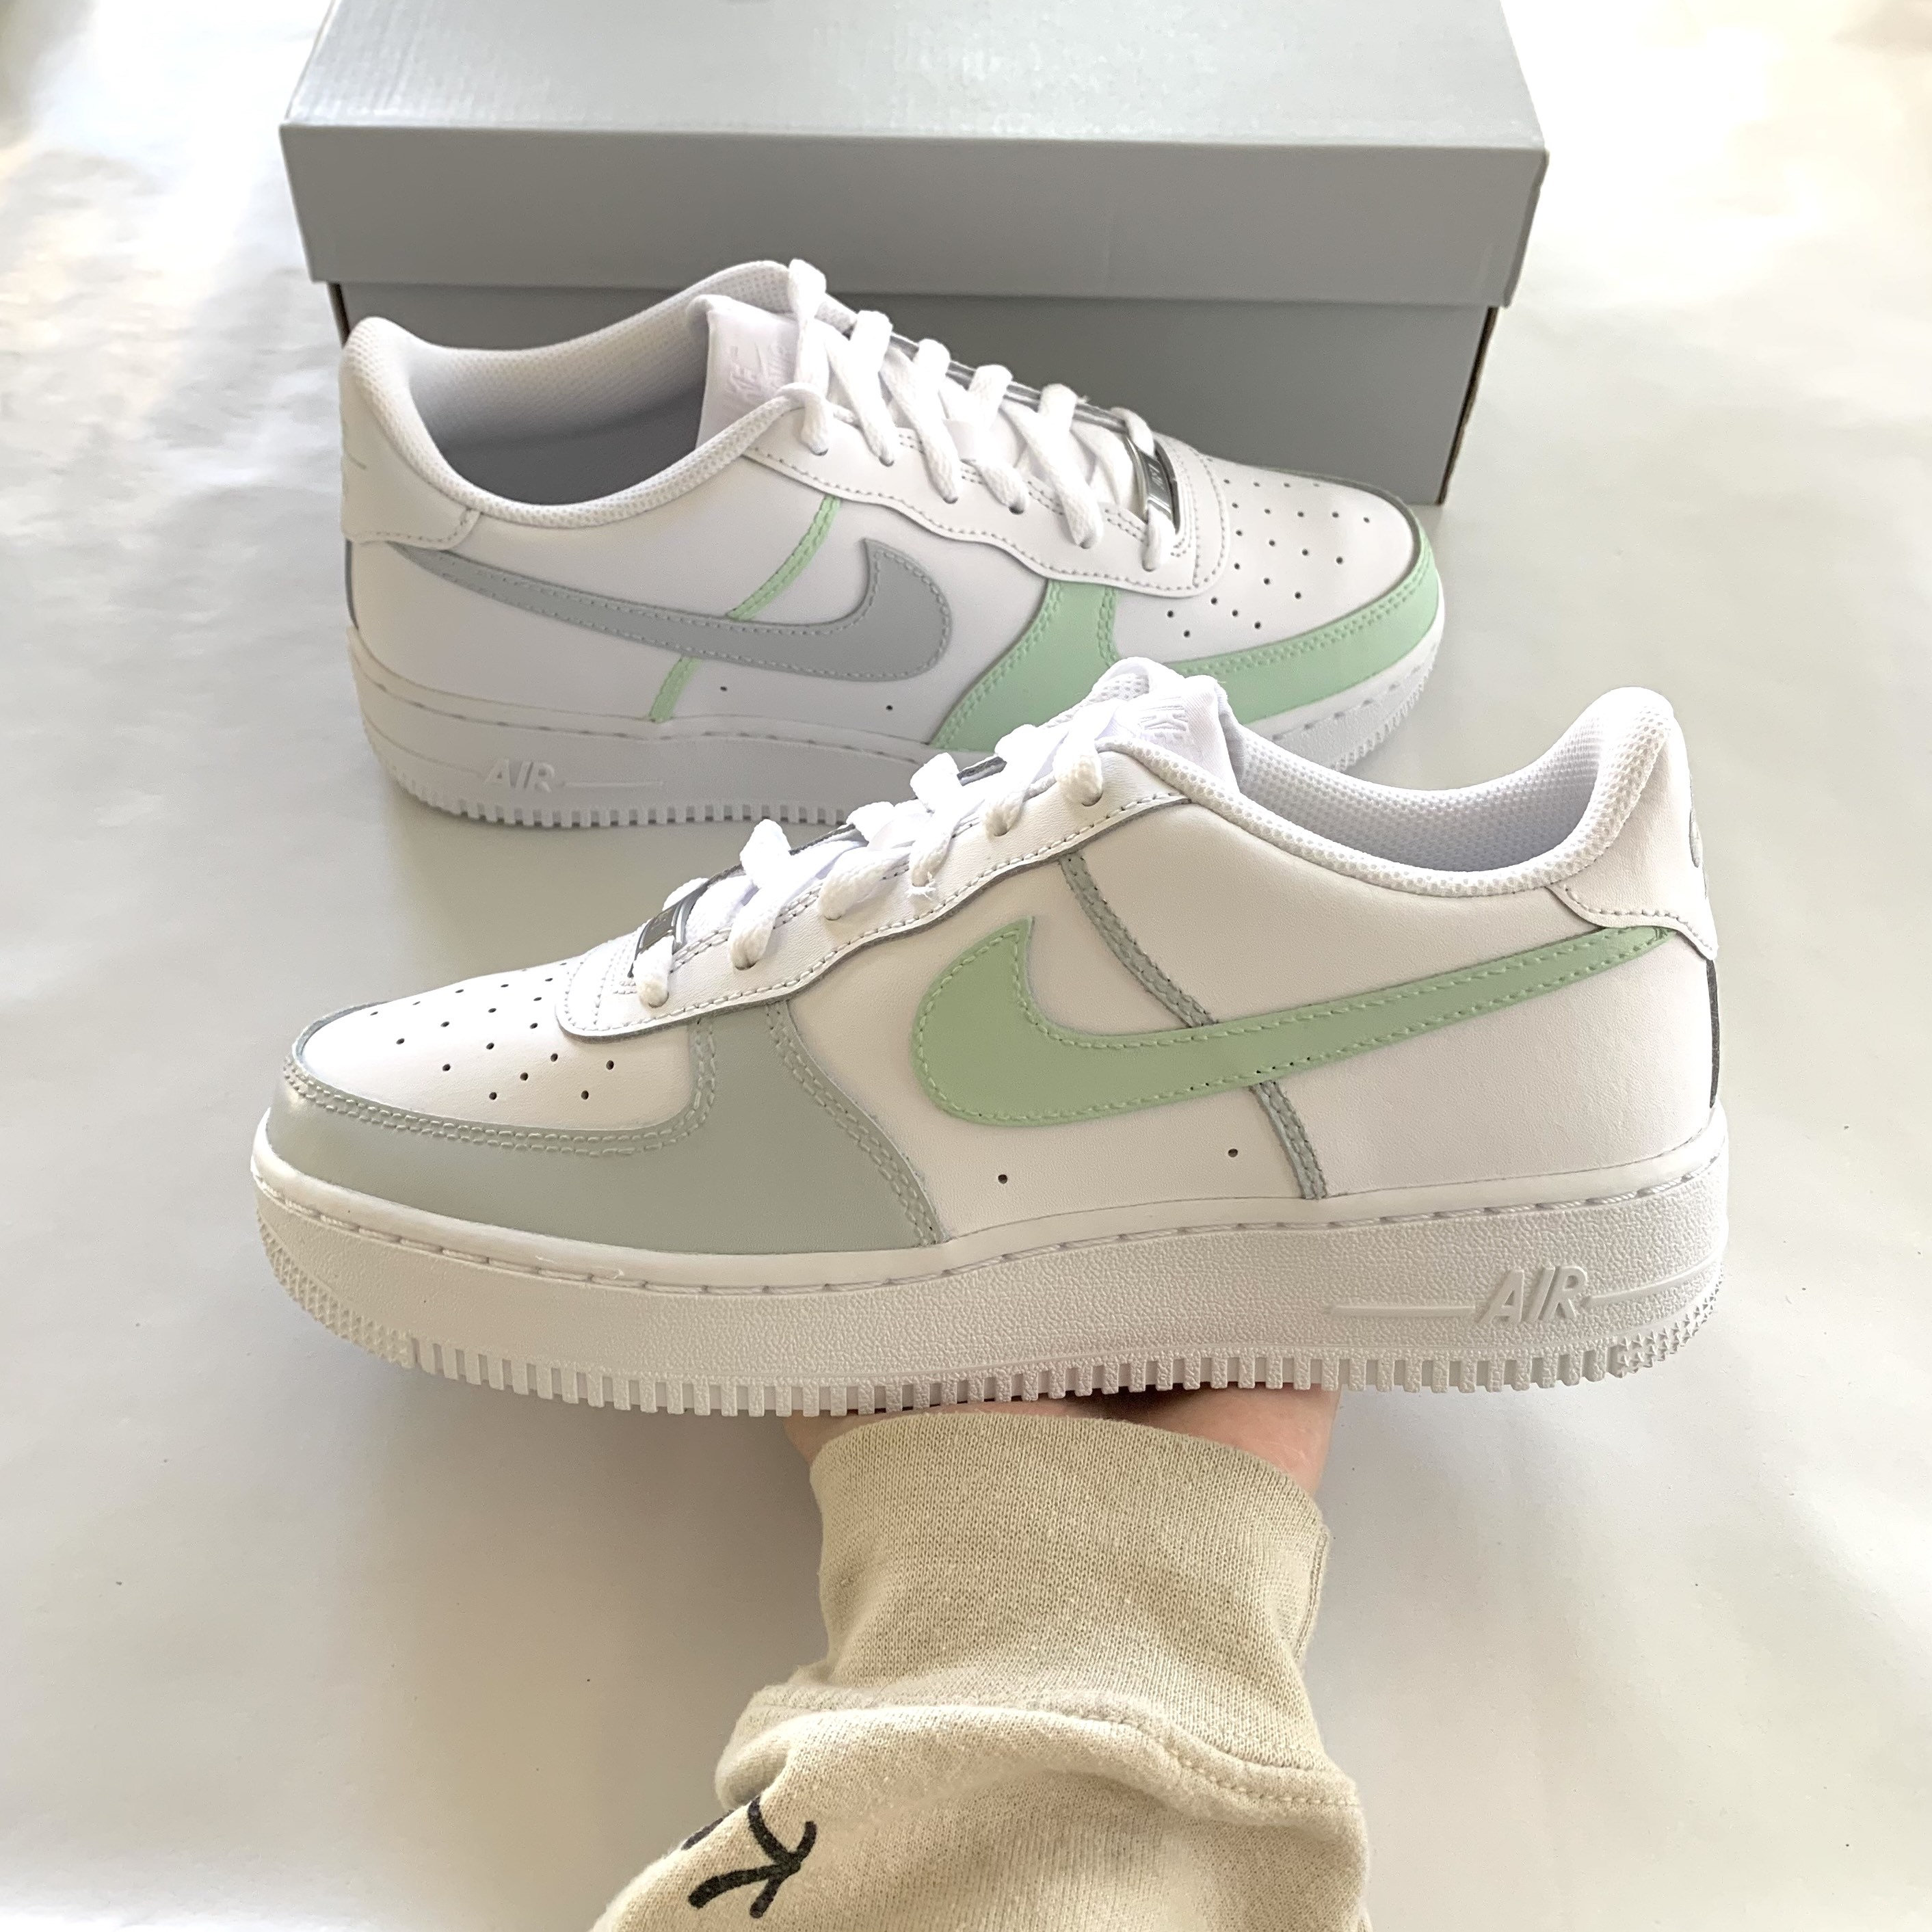 painting on air forces